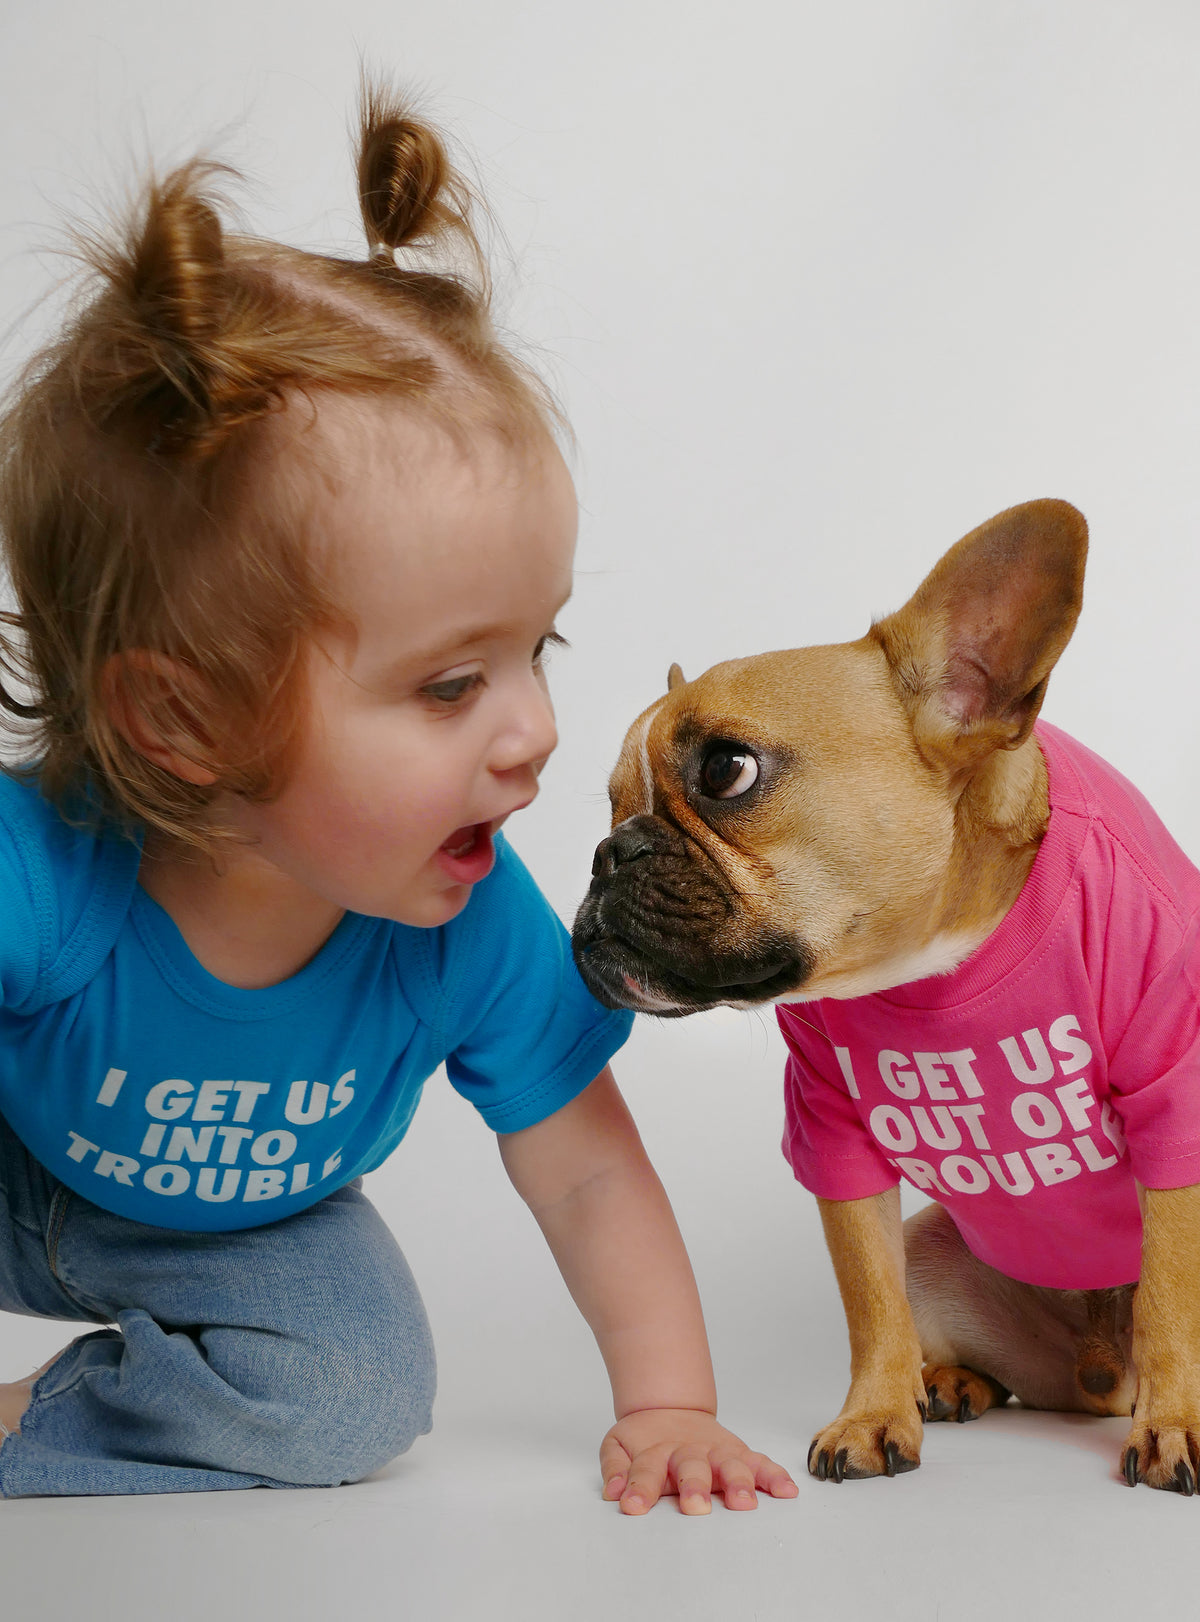 I Get Us Into + Out of Trouble (2-Pack) Baby + Dog Set